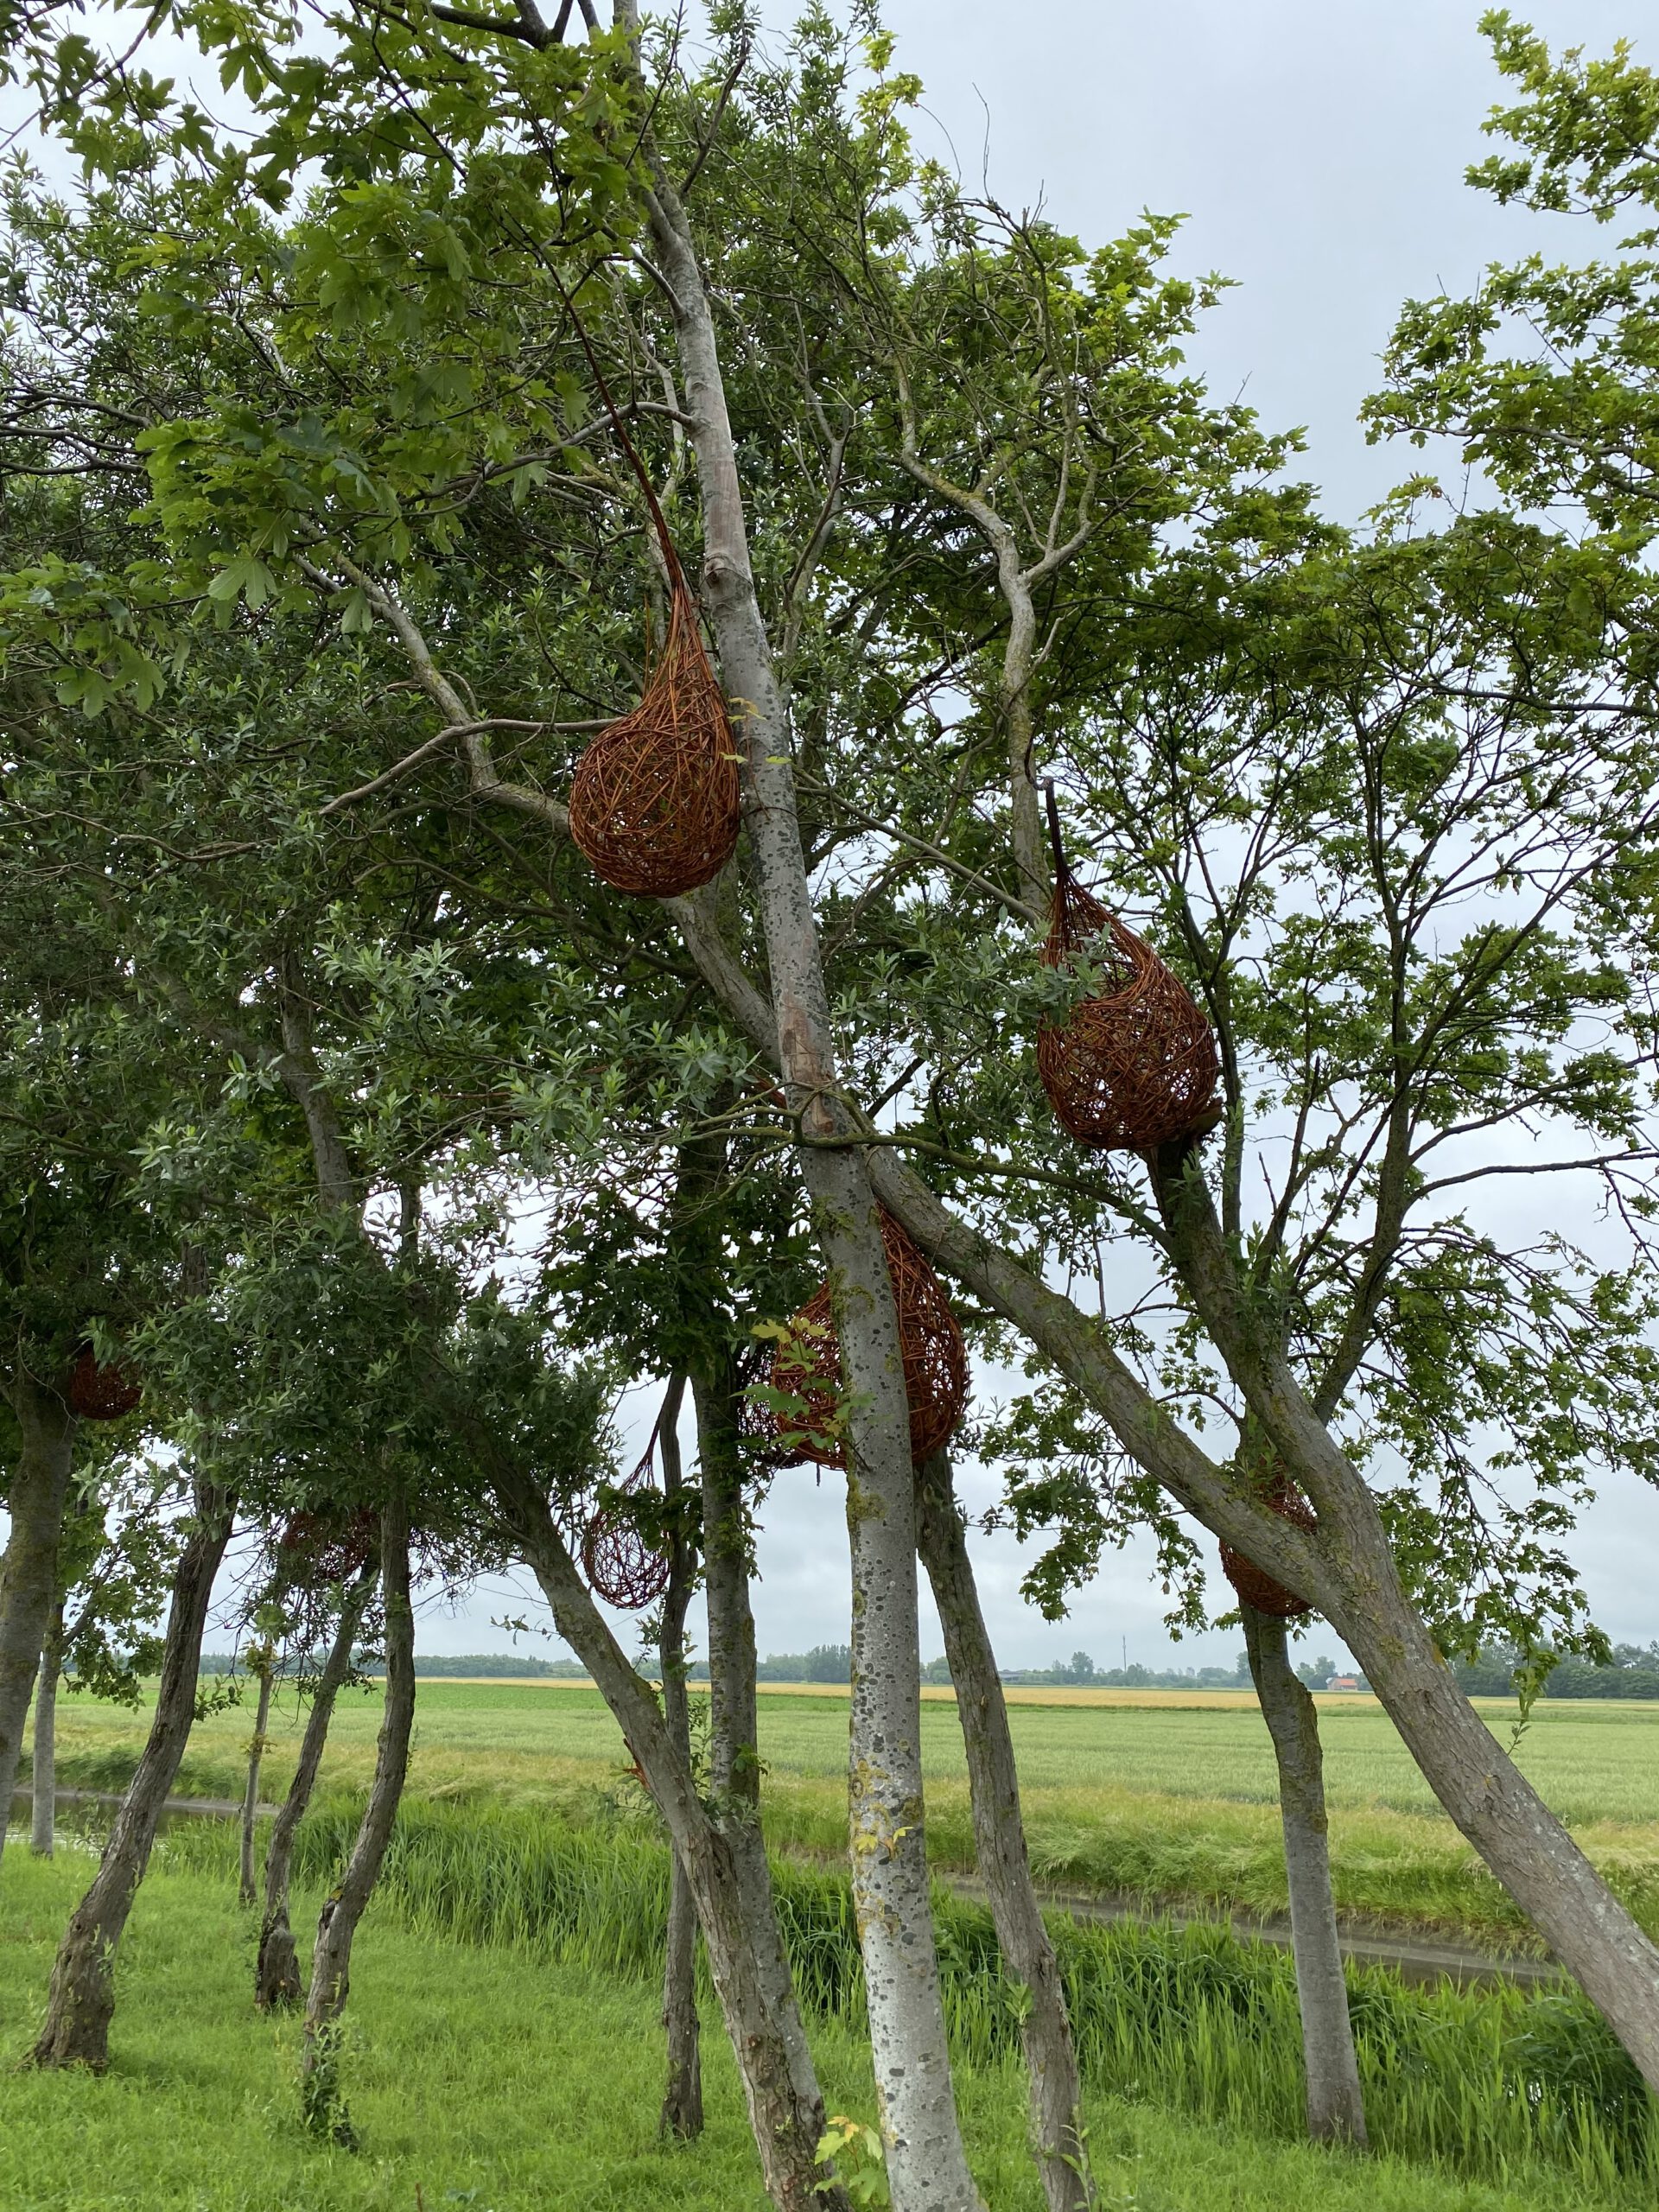 A FANTASTIC LAND-ART PROJECT BY GEERT PATTYN IN THE COAST AREA OF FLANDERS - cocoons - An Theunynck blog on thursd